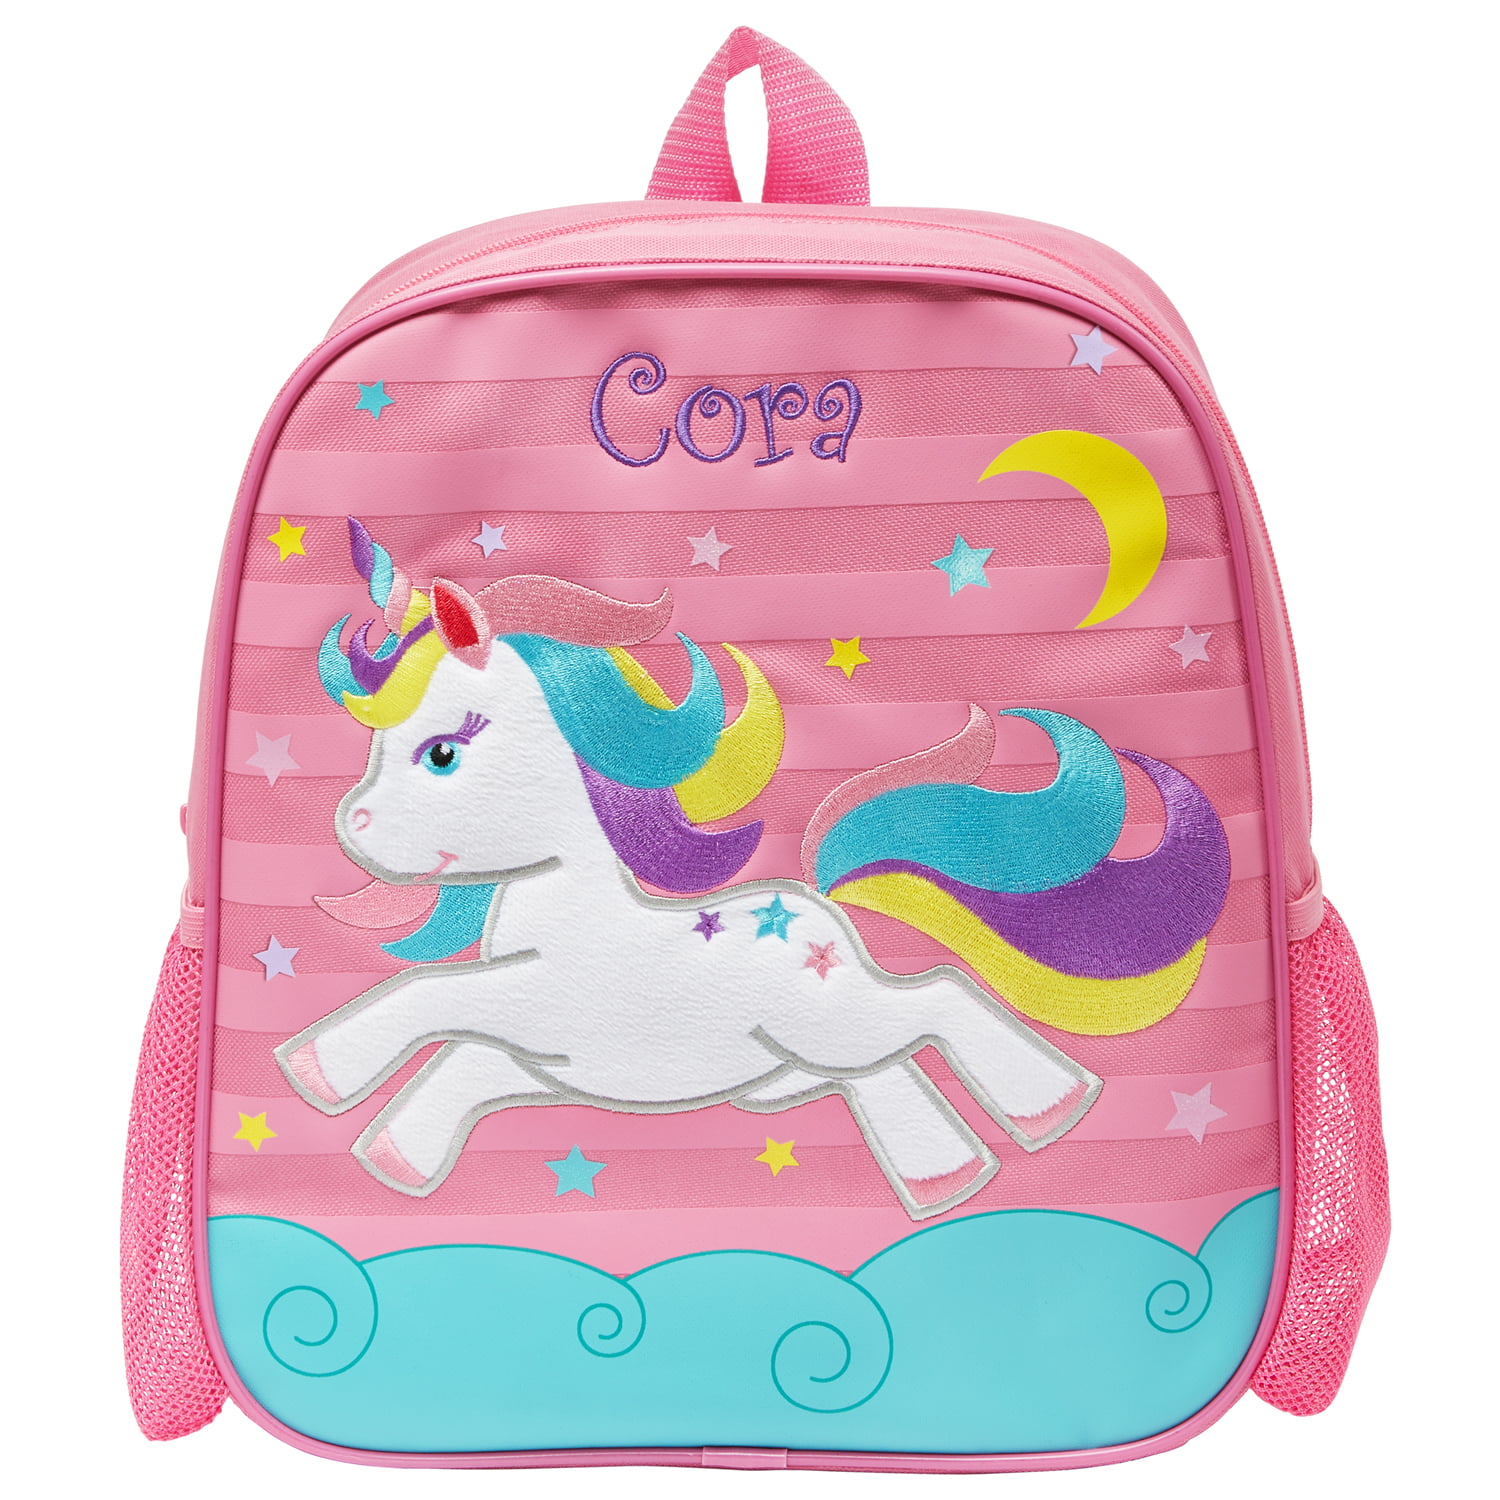 ONLINE - Personalized Just For Me Backpack- Unicorn - Walmart.com ...